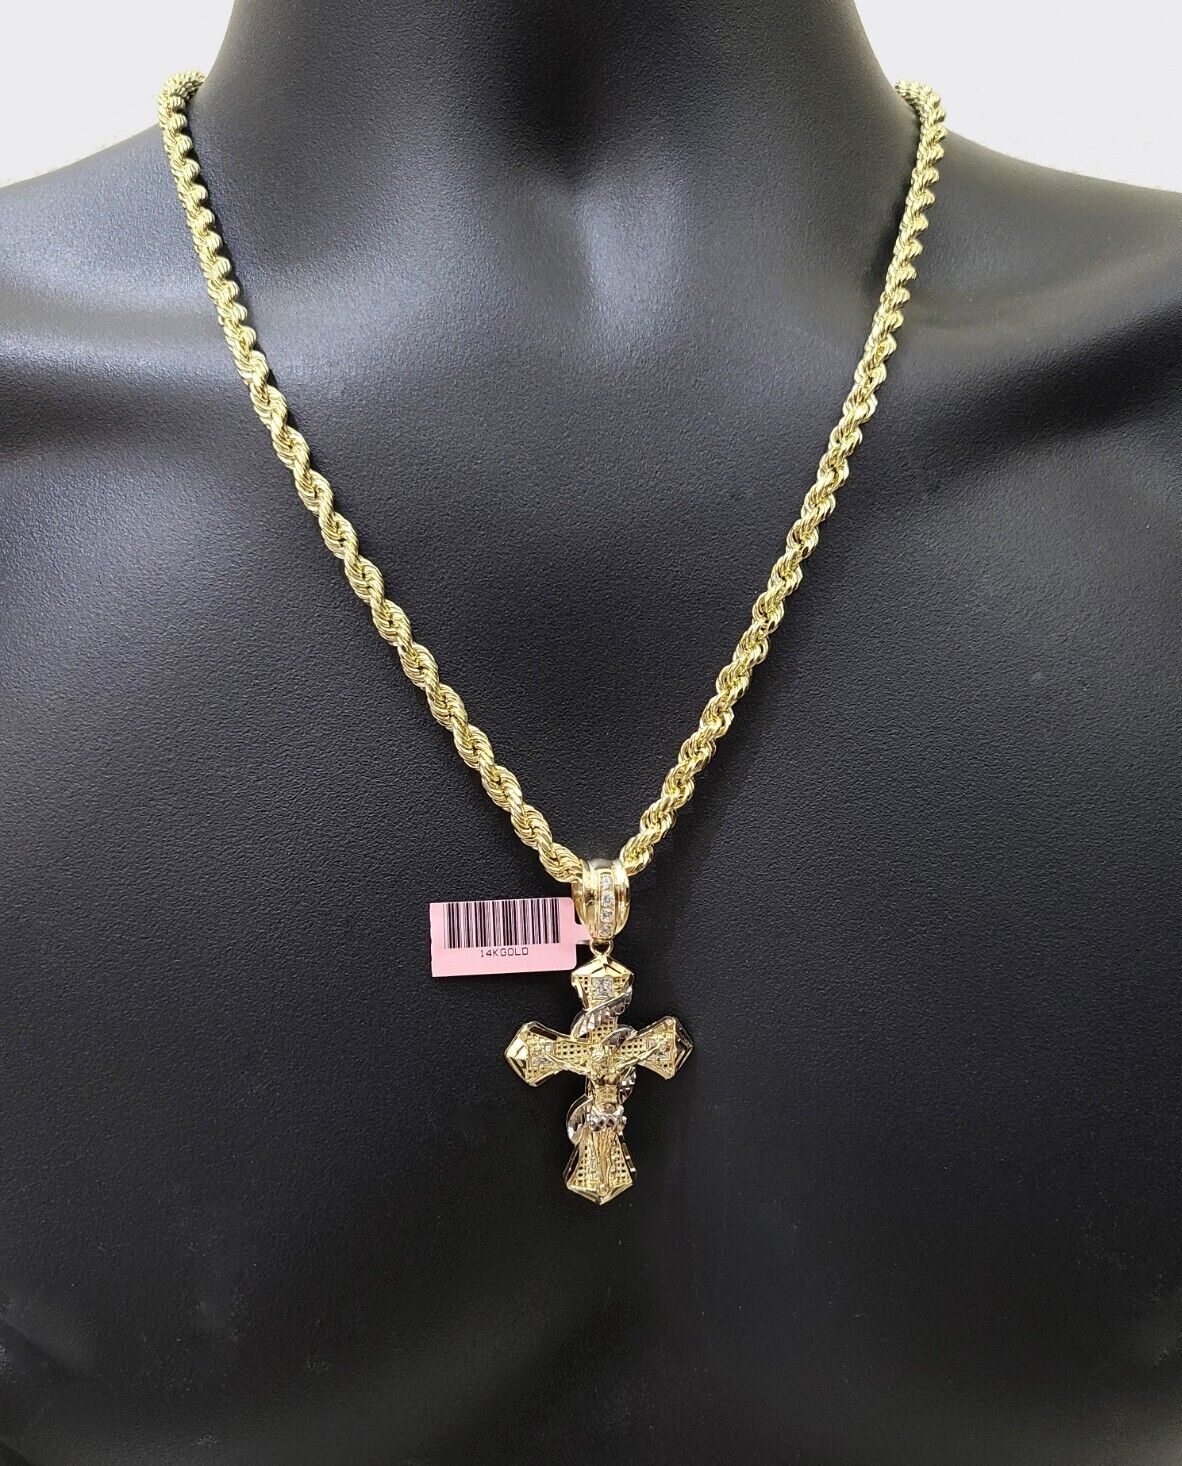 Real 14K Yellow Gold Rope Chain 5mm 22'' Necklace Jesus Cross Charm Pendant 14kt